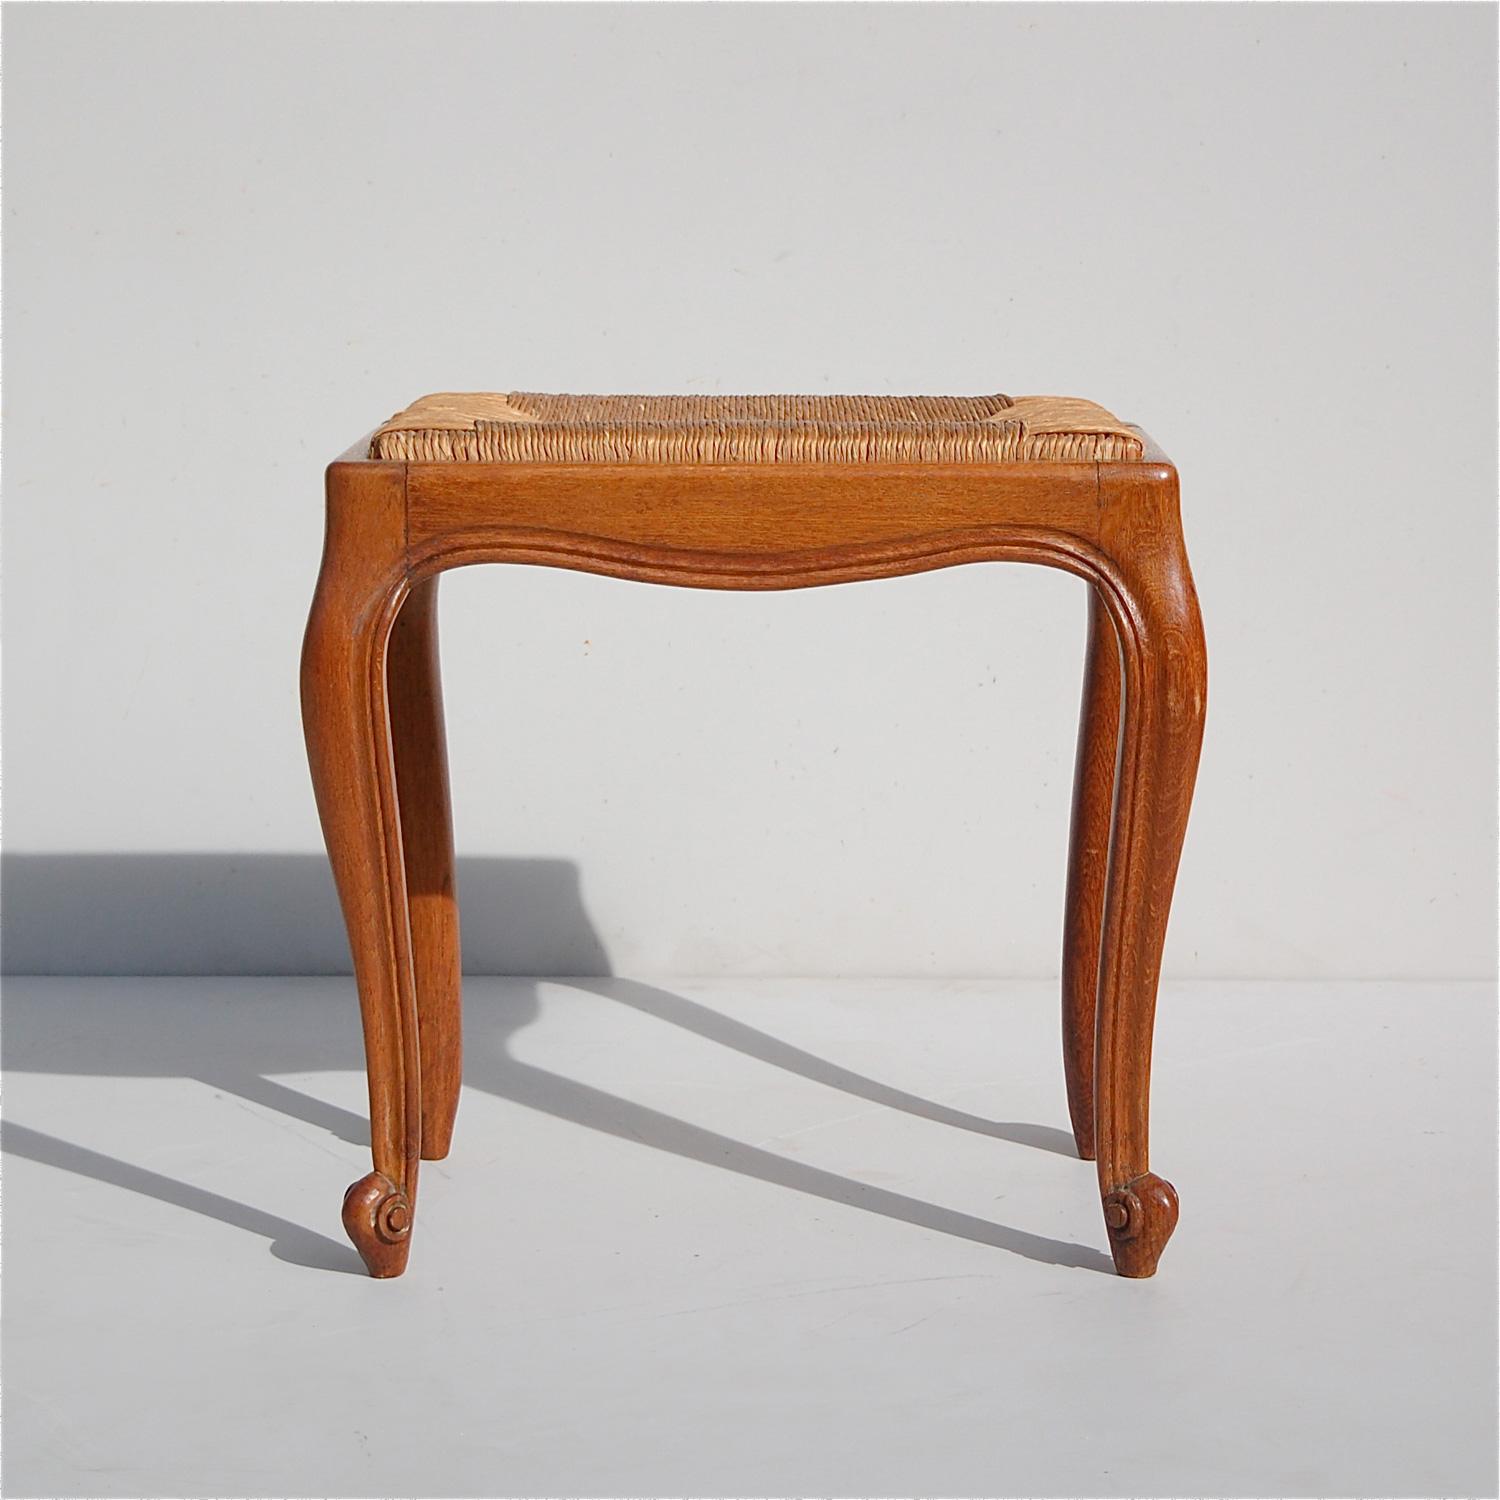 This French, vintage, rectangular stool, piano stool or seat with rush seat has been carved from solid oak and is a 1950s interpretation of the Louis XV design style. It has cabriole legs ending in scroll feet.